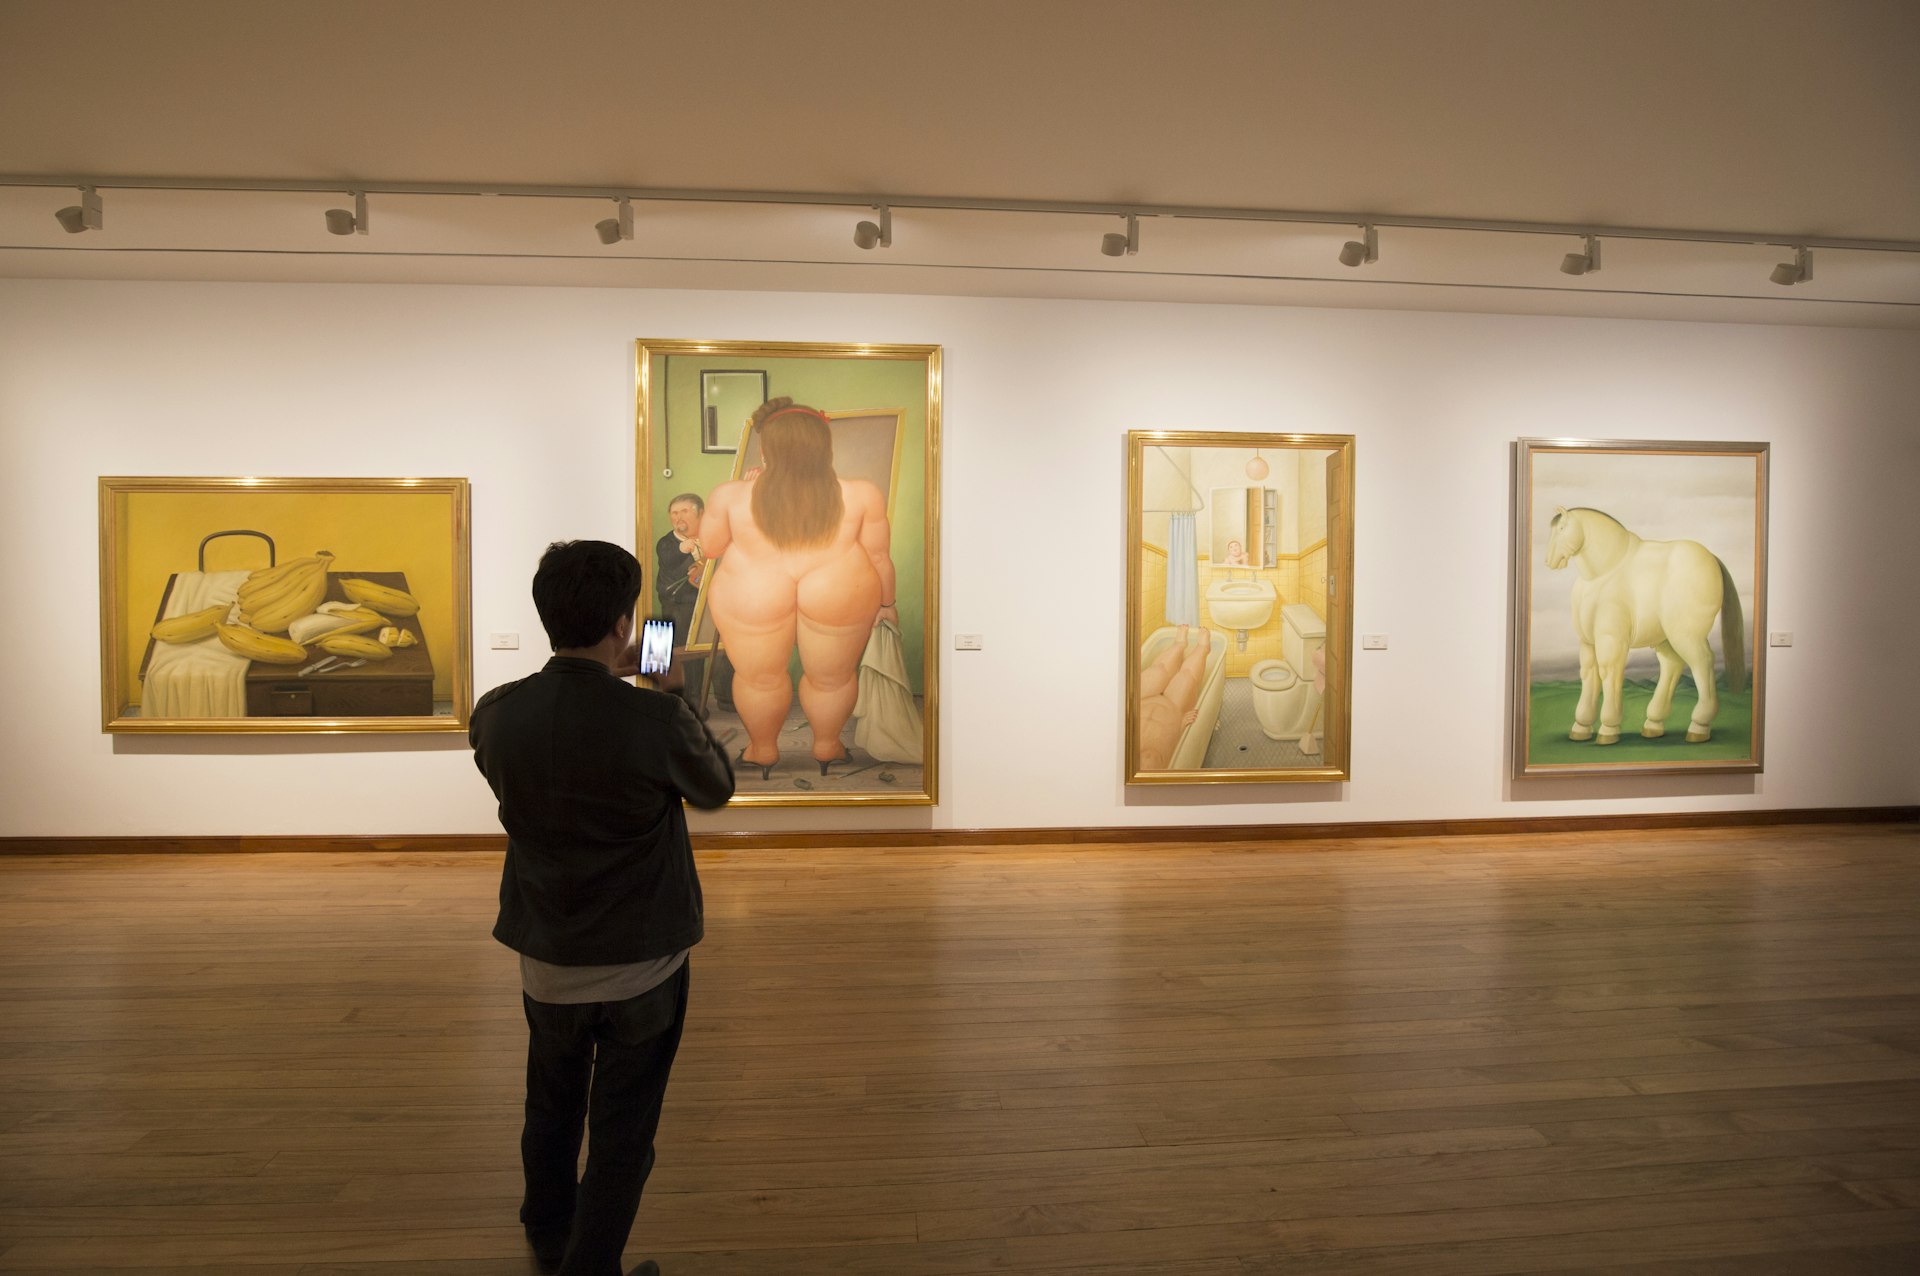 A visitor looks at paintings by Fernando Botero at the Museo Botero, Bogotá, Colombia, South America